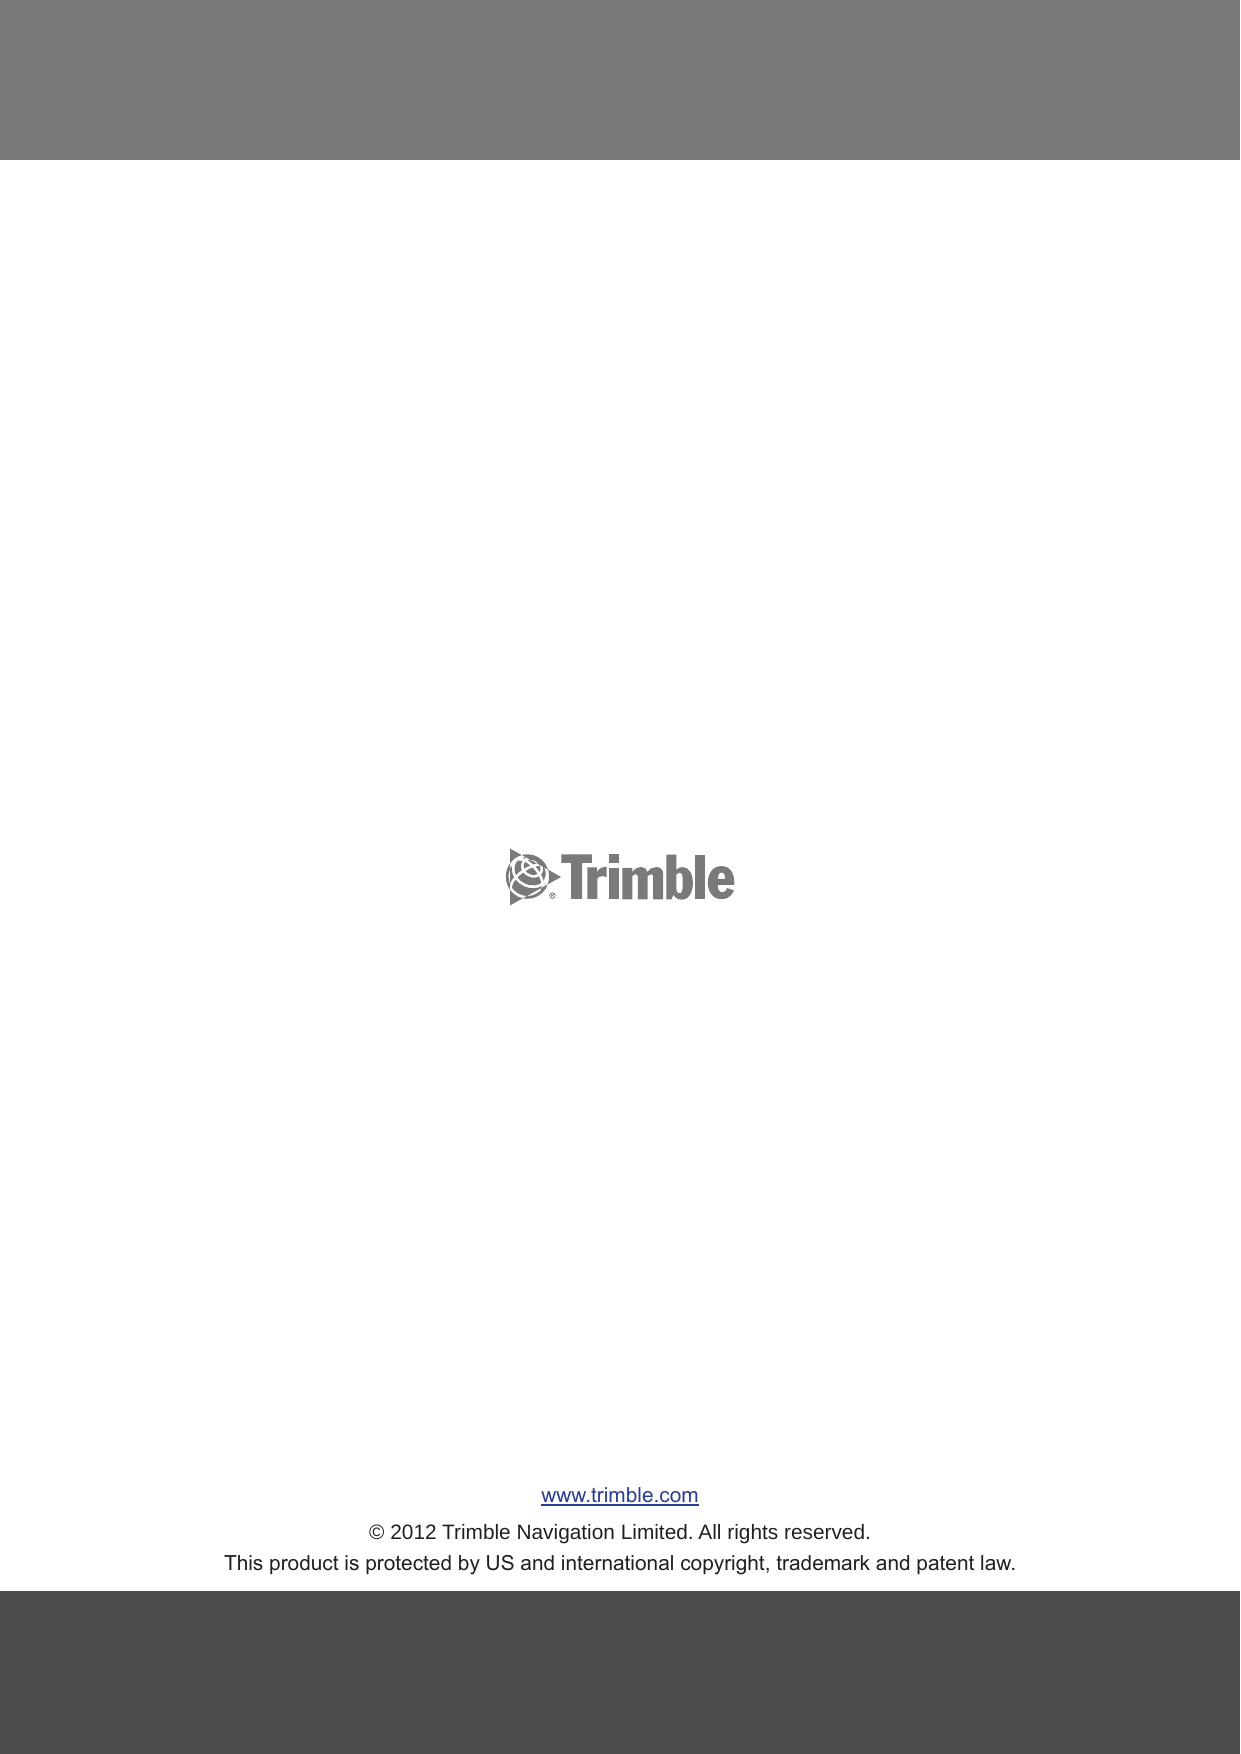 www.trimble.com© 2012 Trimble Navigation Limited. All rights reserved.This product is protected by US and international copyright, trademark and patent law.